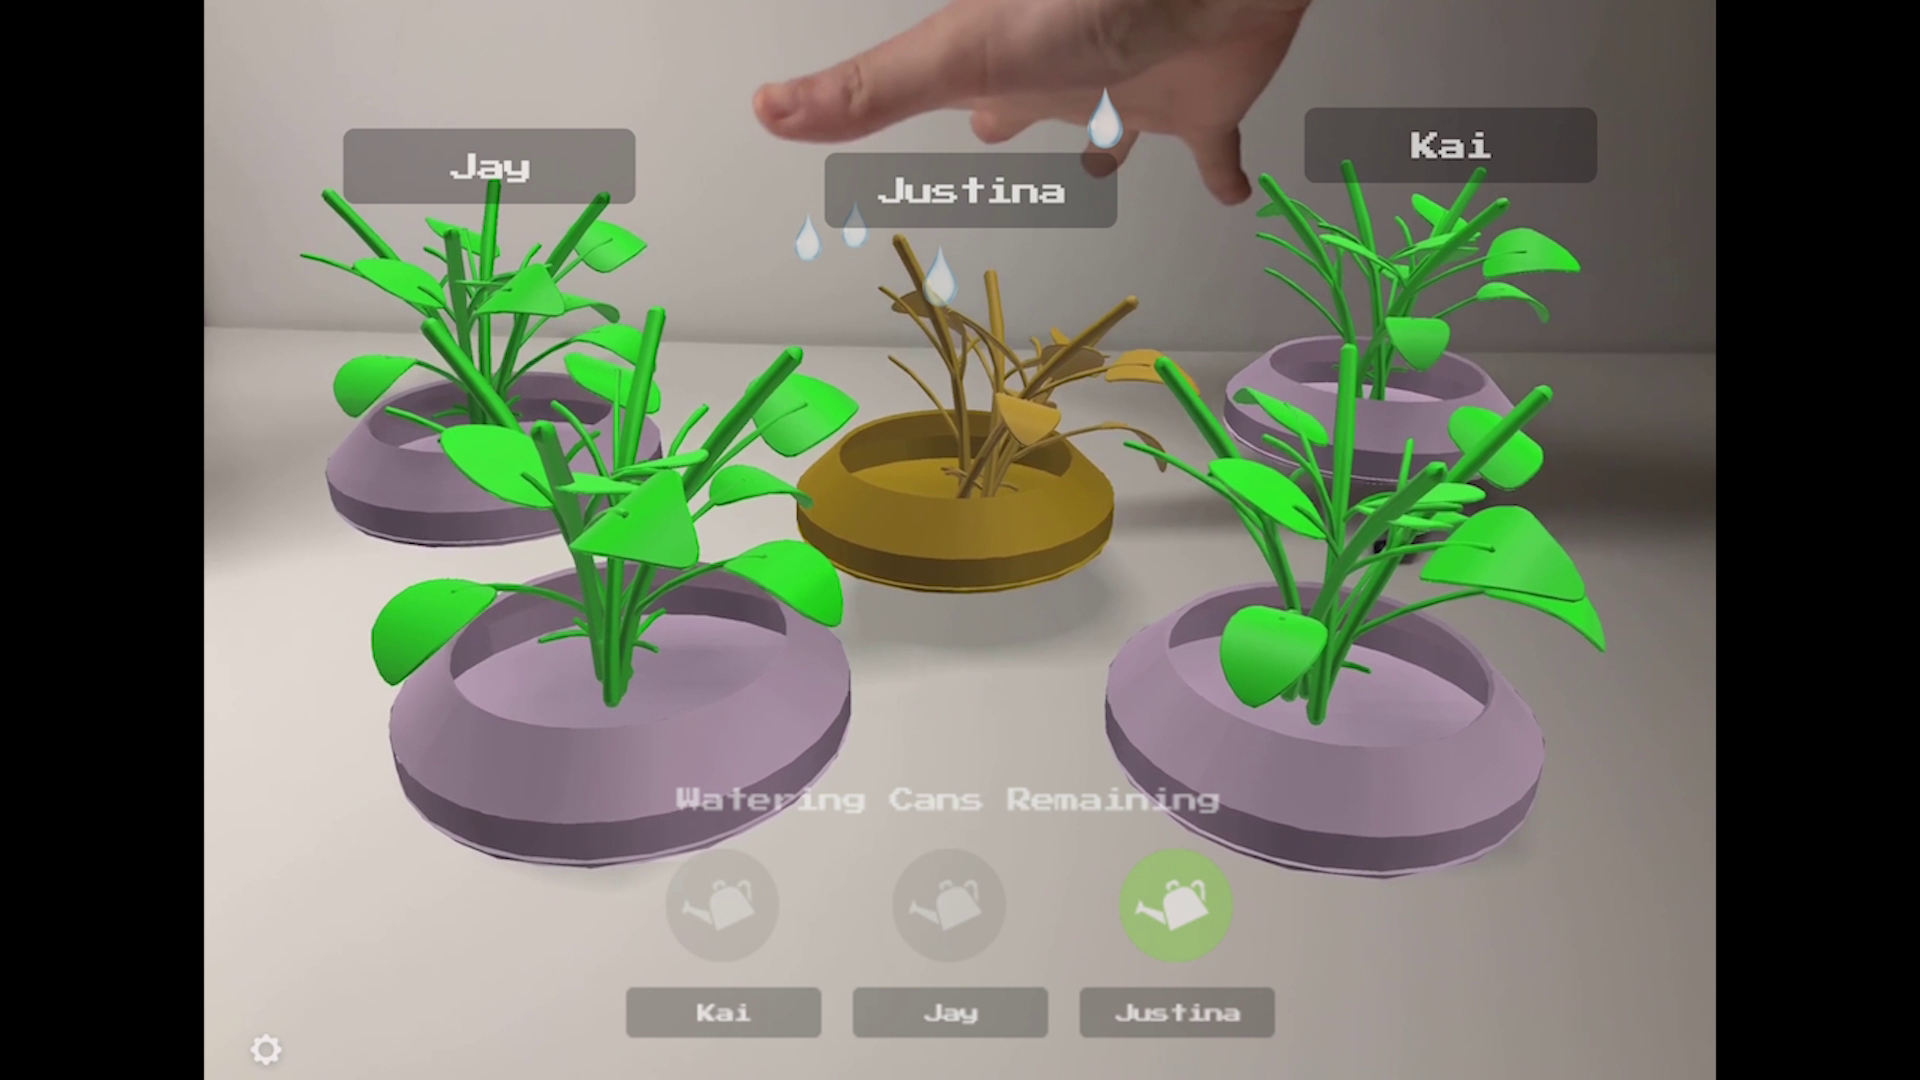 Mockup of hand gestures used to water AR plants.